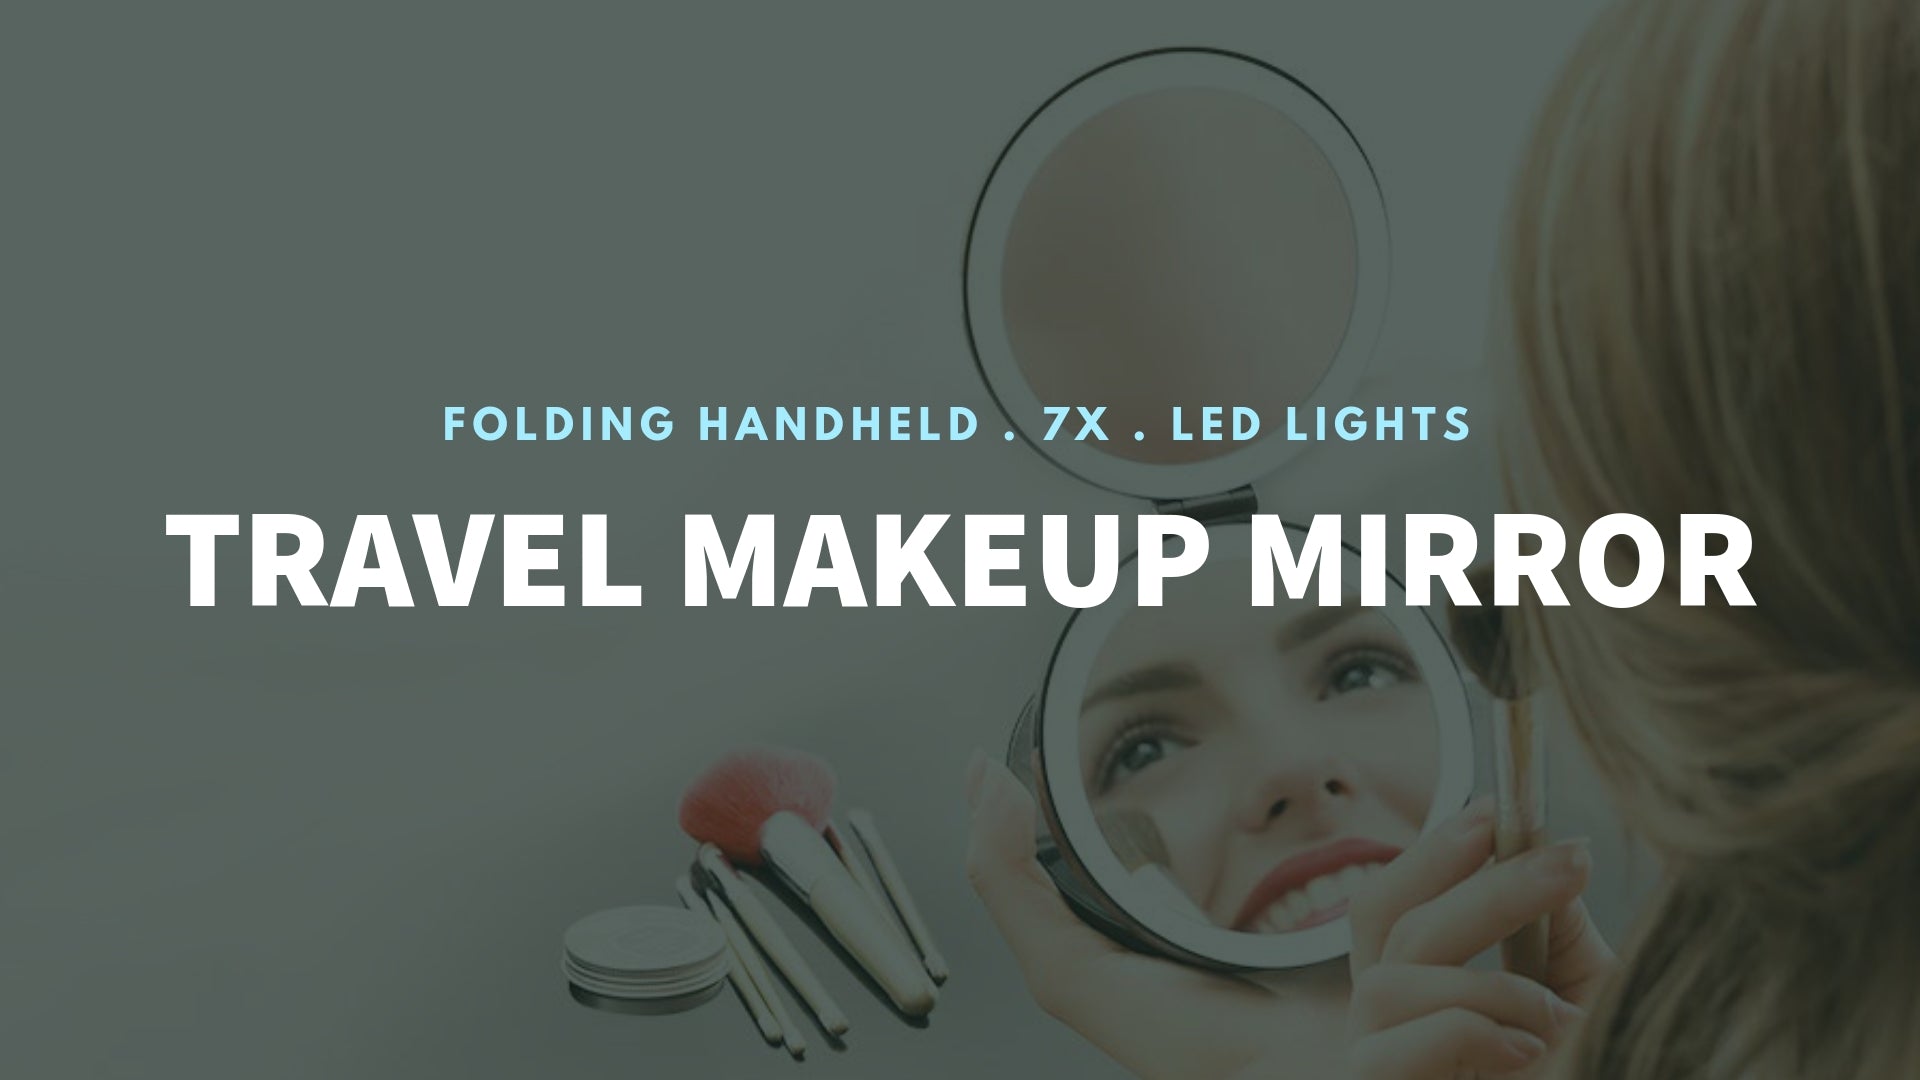 LED Lighted 3-fold Travel Compact Makeup Mirror 1X/7X Magnification magnifying mirror standing makeup magnifying bathroom s with lights trifold battery magnifying glass absolutely lush best hand zadro round makeup jerdon makeup reviews natural makeup estala hollywood vanity fancii travel makeup gala 10x magnifying makeup bestmakeup makeup with lights best ratedmakeup anjou makeup kensie vanity vanity with lights tri fold vanity wall mounted makeup banner - GadgetiCloud